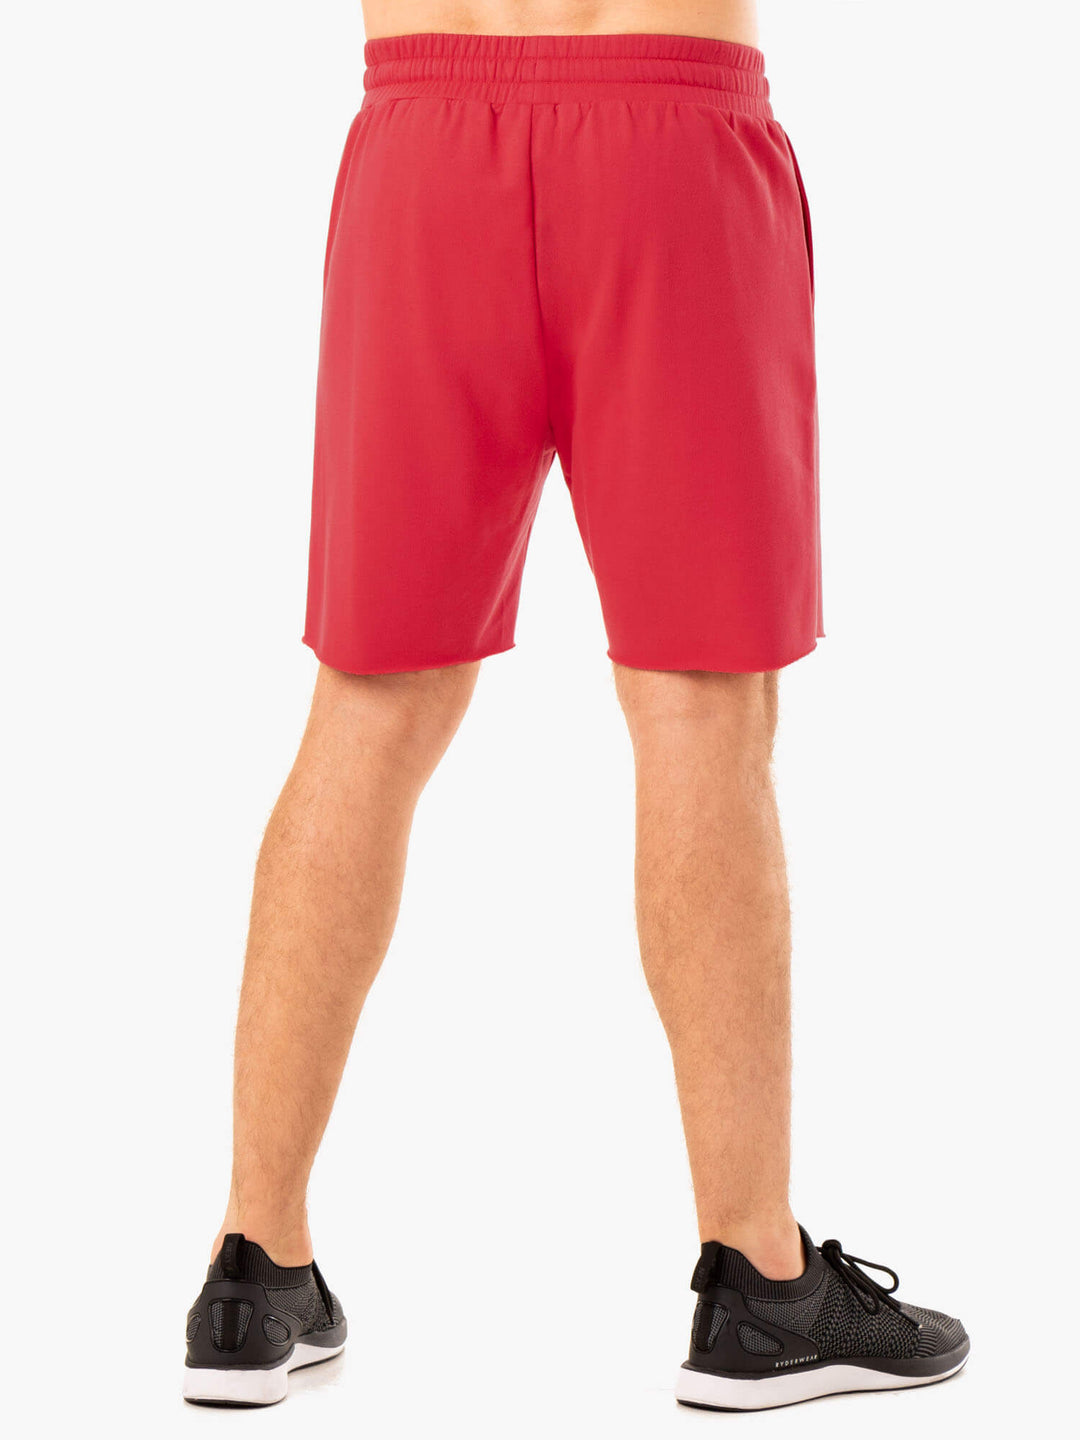 Recharge Track Gym Short - Red Clothing Ryderwear 